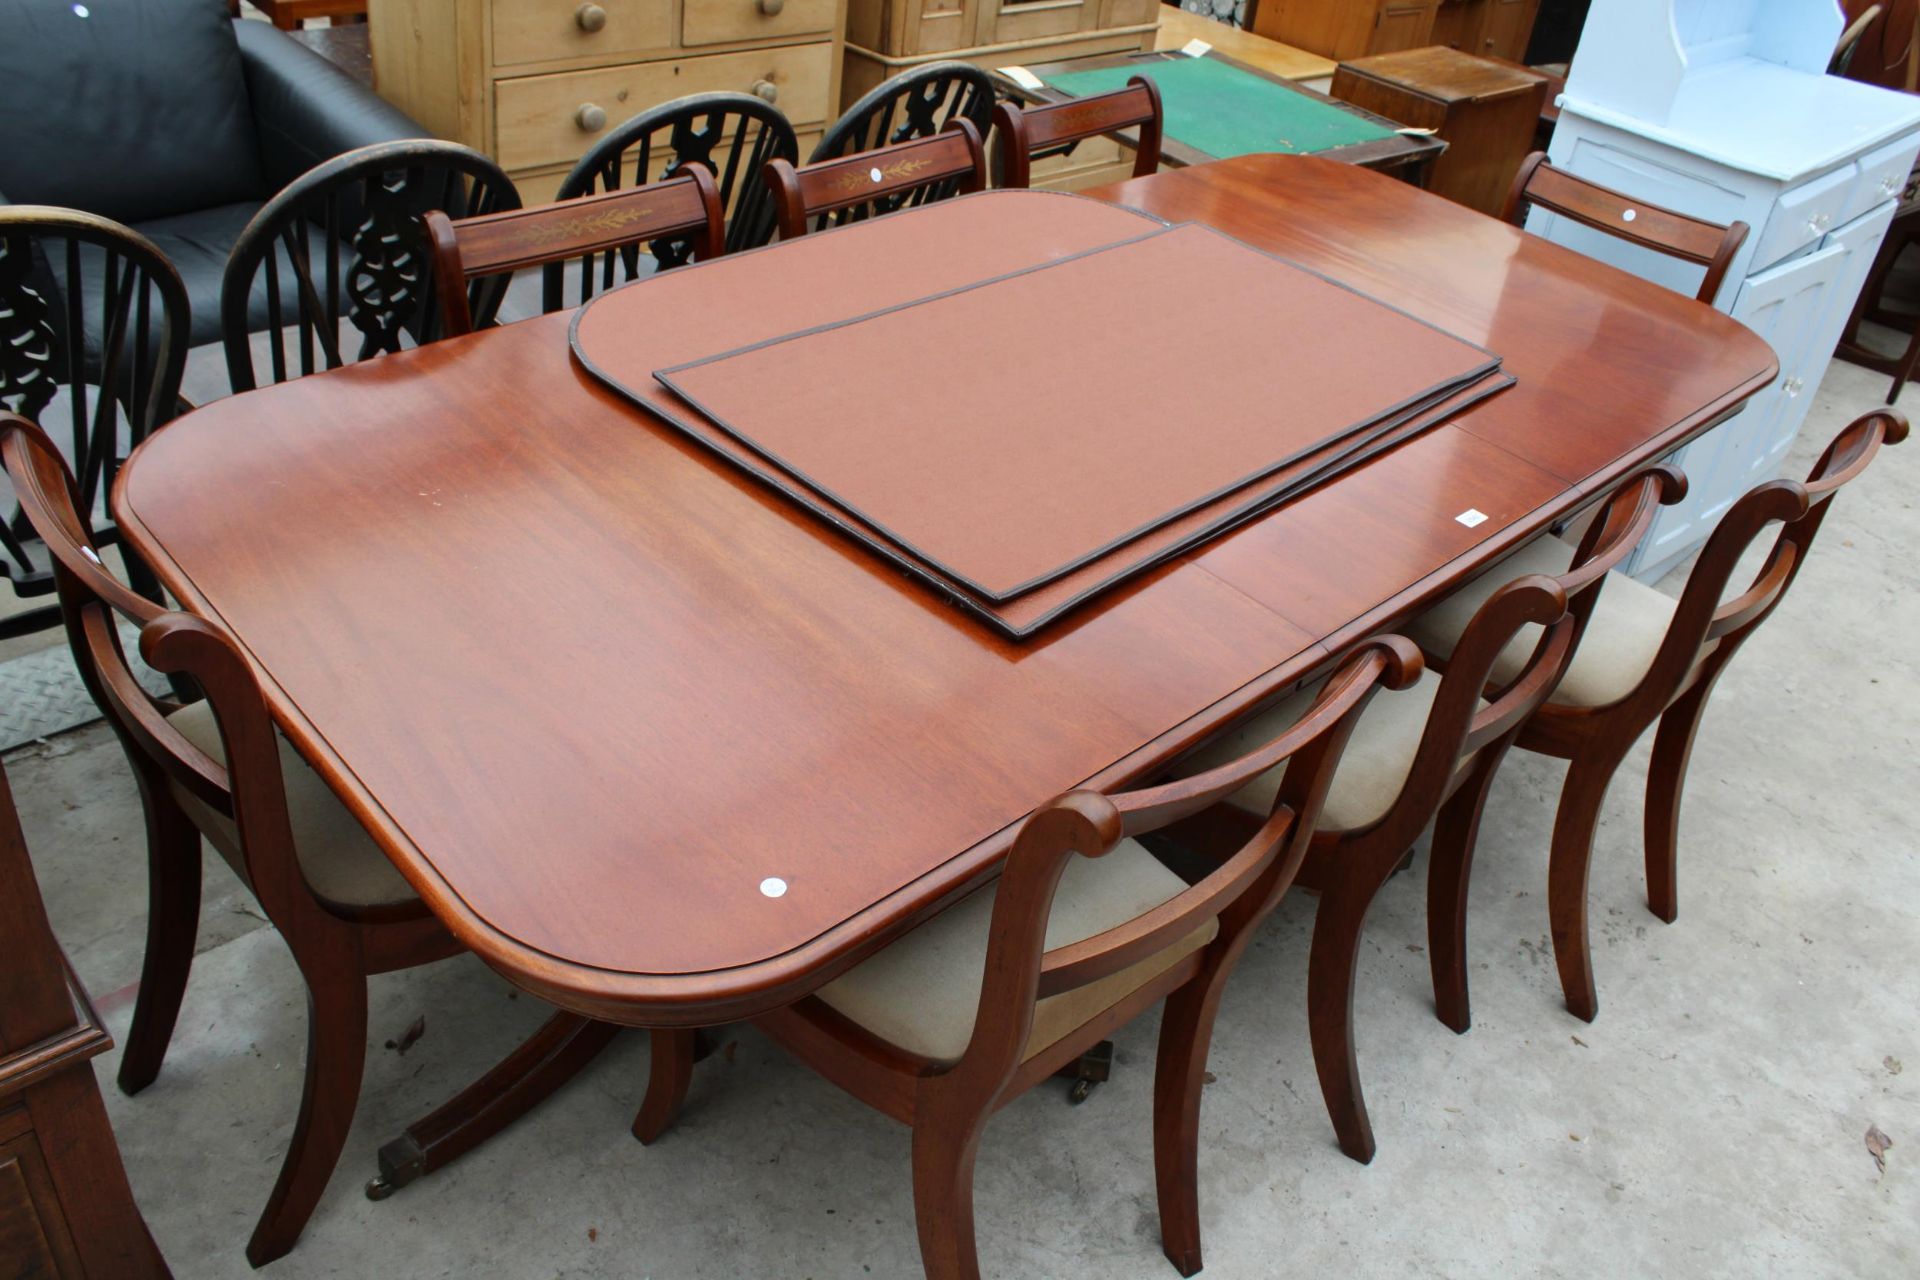 A MAHOGANY REGENCY STYLE EXTENDING TWIN PEDESTAL DINING TABLE 62" X 38" (LEAF 21") AND SIX BRASS - Image 6 of 6